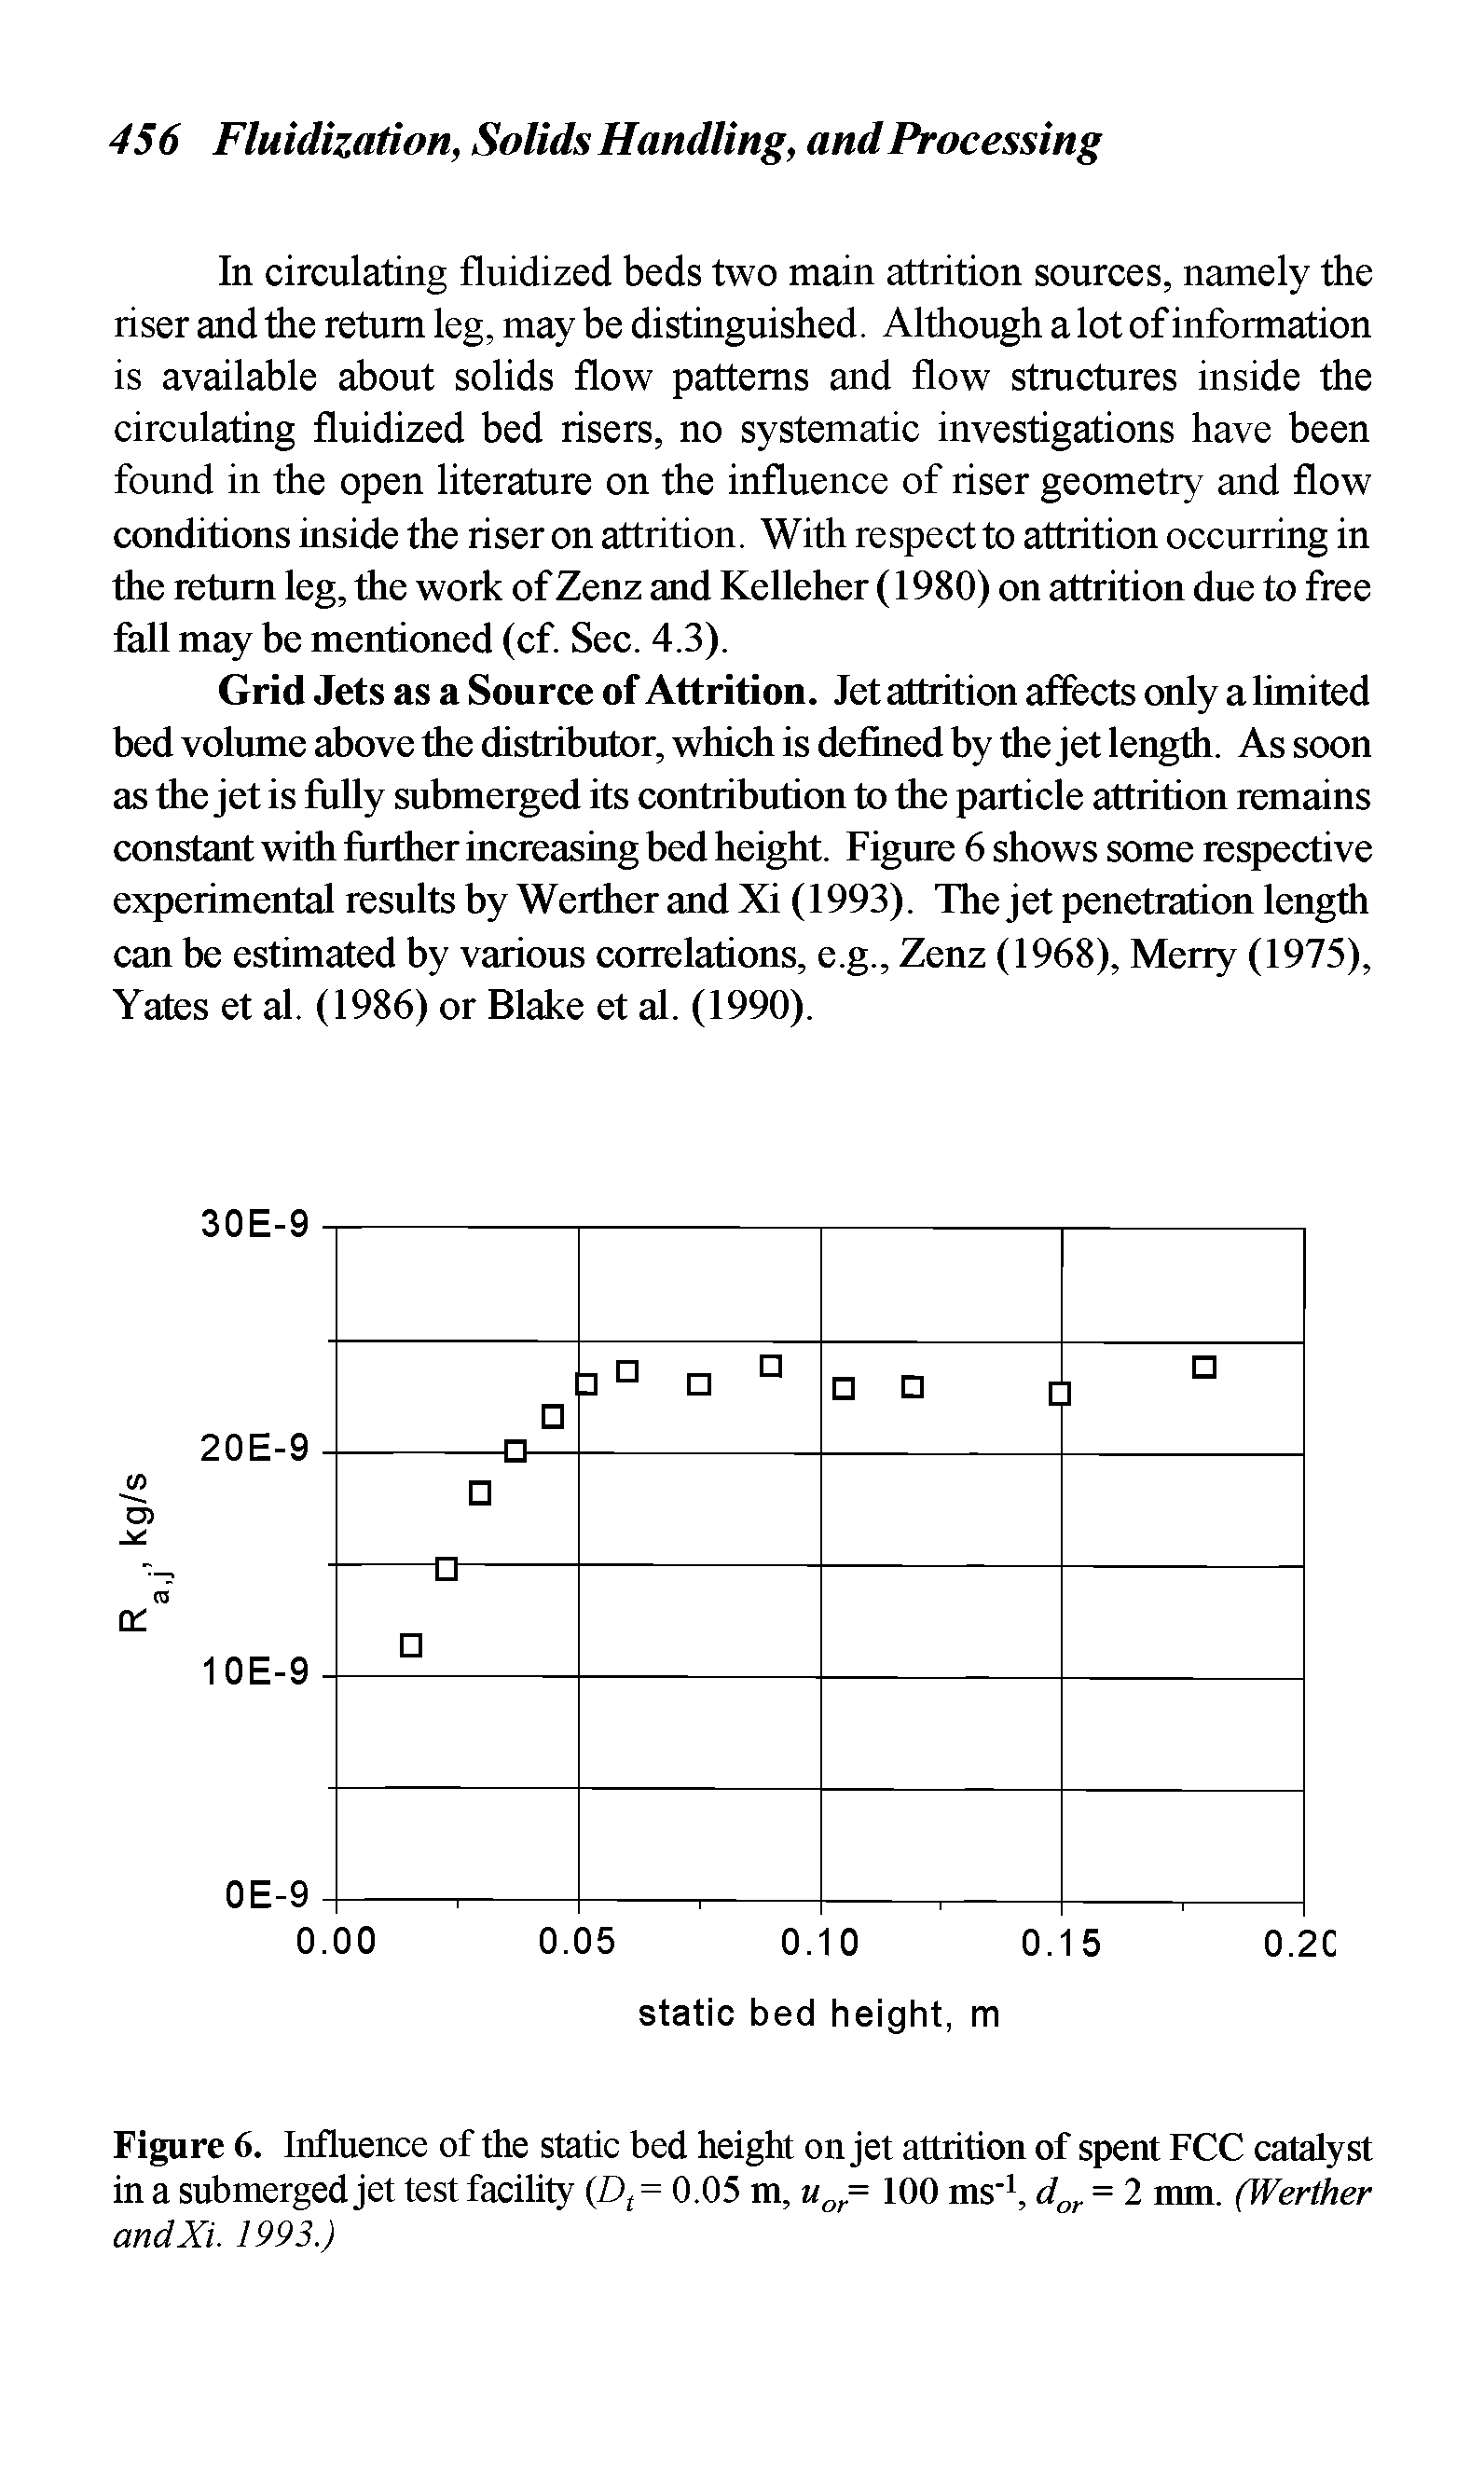 Figure 6. Influence of the static bed height on jet attrition of spent FCC catalyst in a submerged jet test facility (Dt = 0.05 m, uor= 100 ms 1, dor = 2 mm. (Werther andXi. 1993.)...